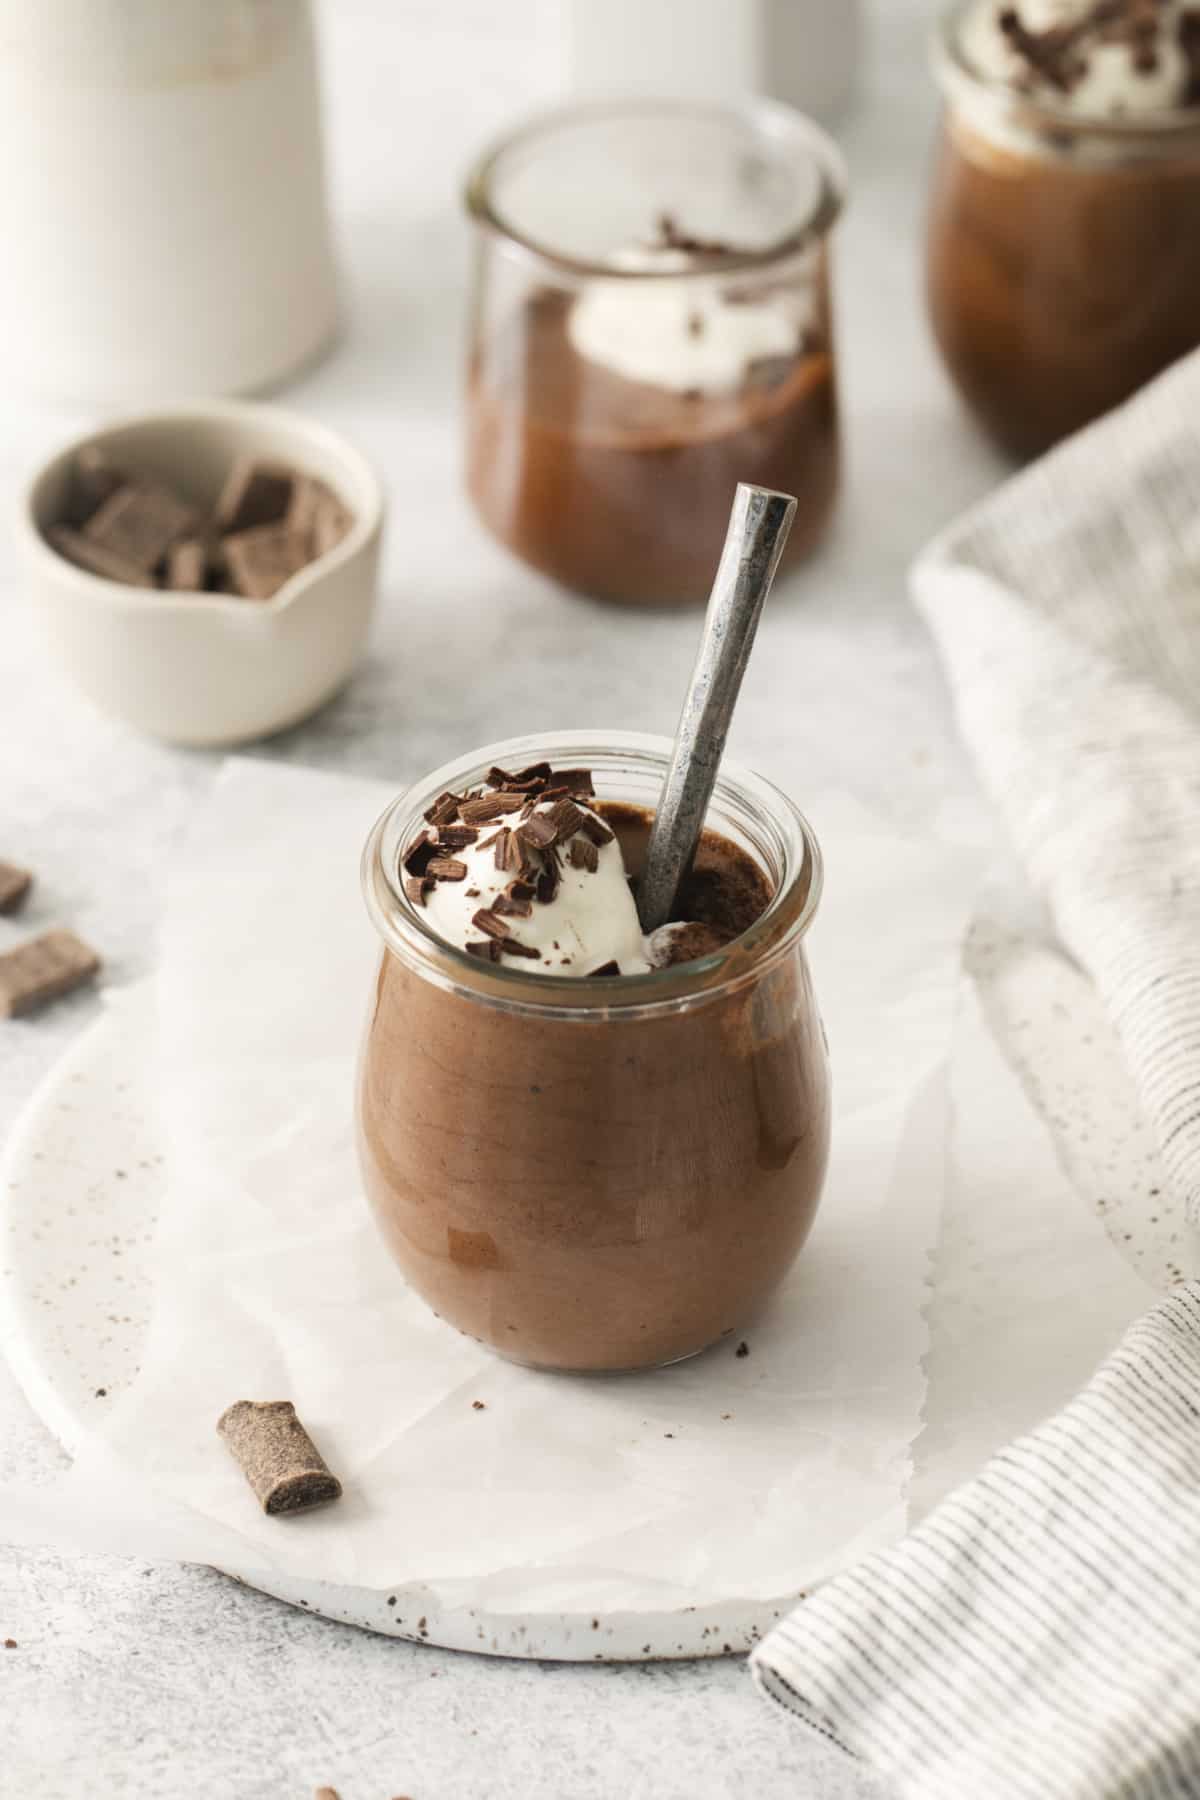 a jar filled with chocolate mousse with a spoon.